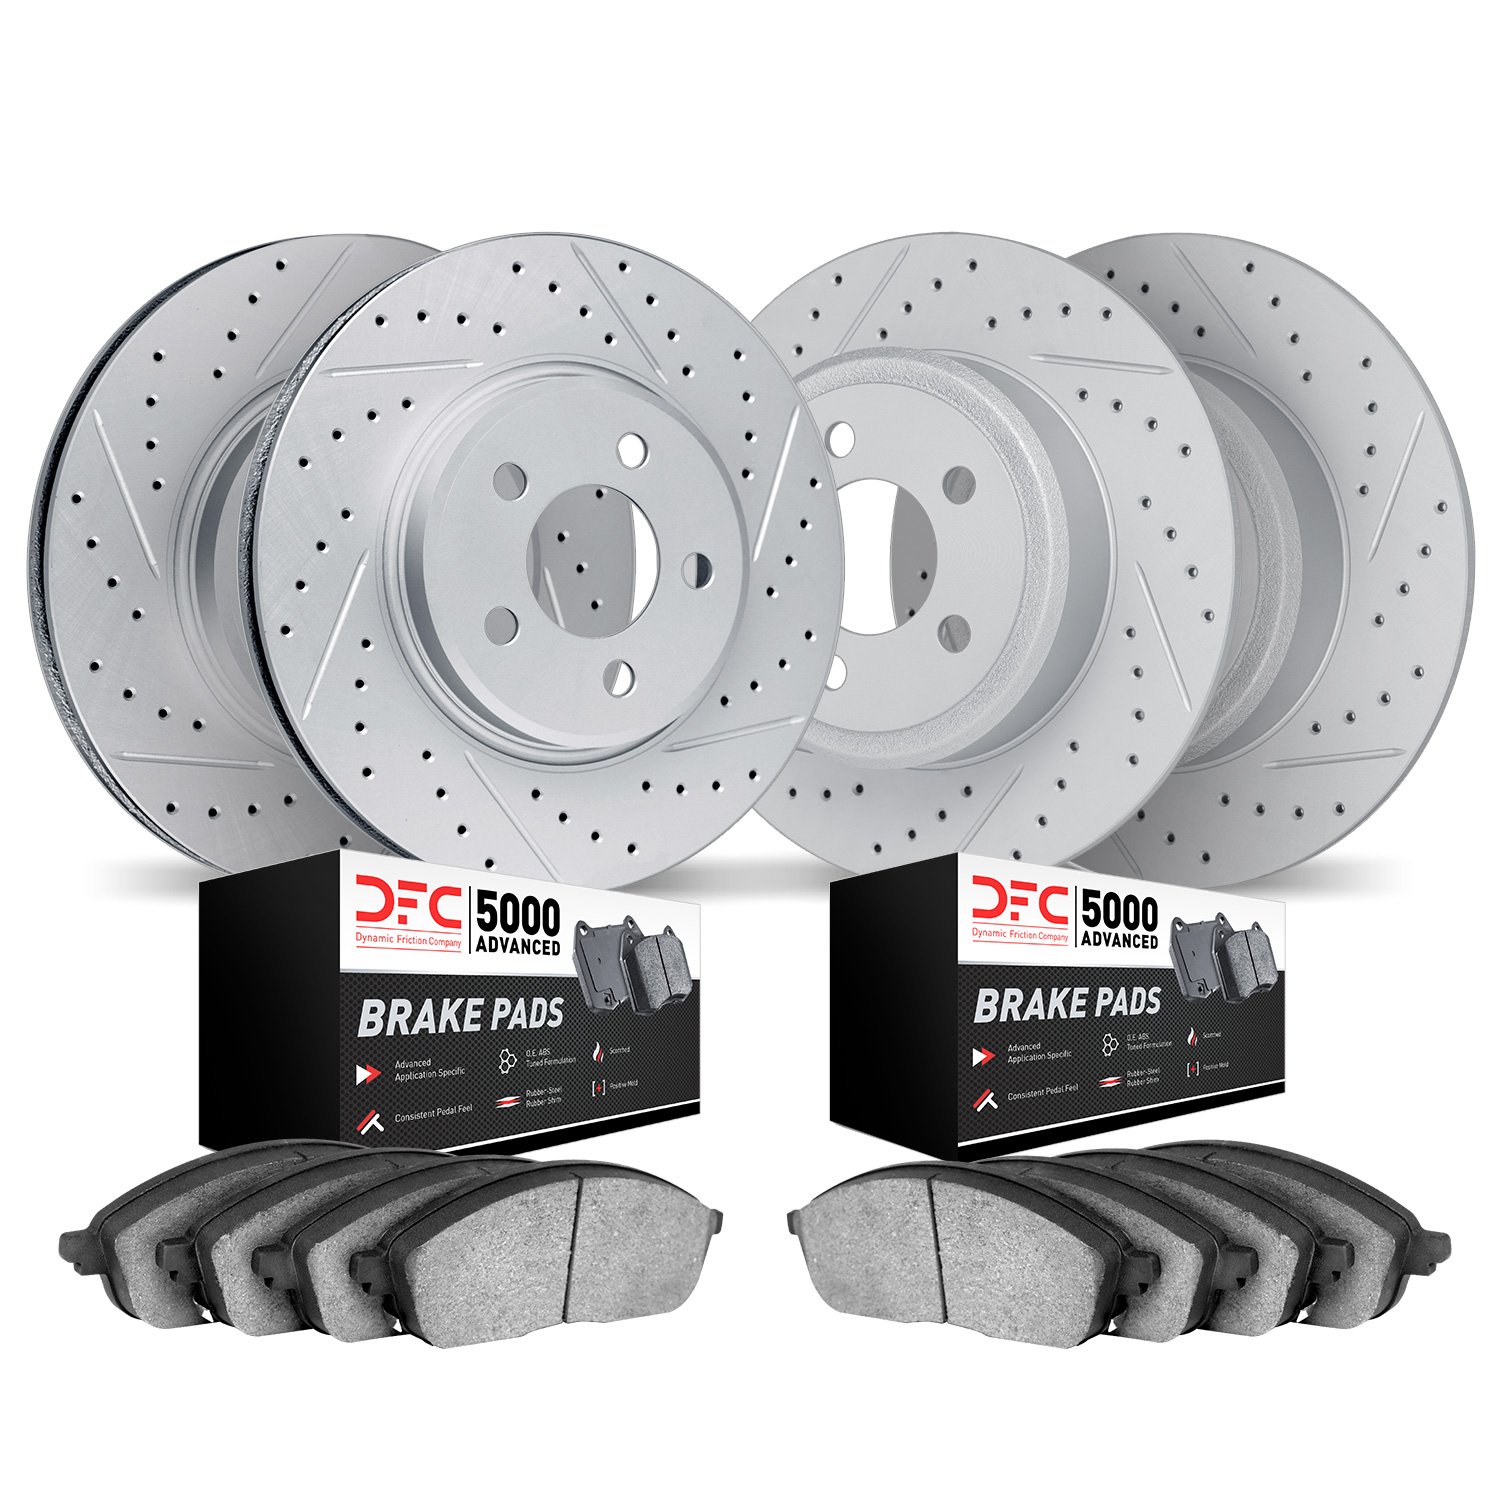 2504-47267 Geoperformance Drilled/Slotted Rotors w/5000 Advanced Brake Pads Kit, 2005-2009 GM, Position: Front and Rear